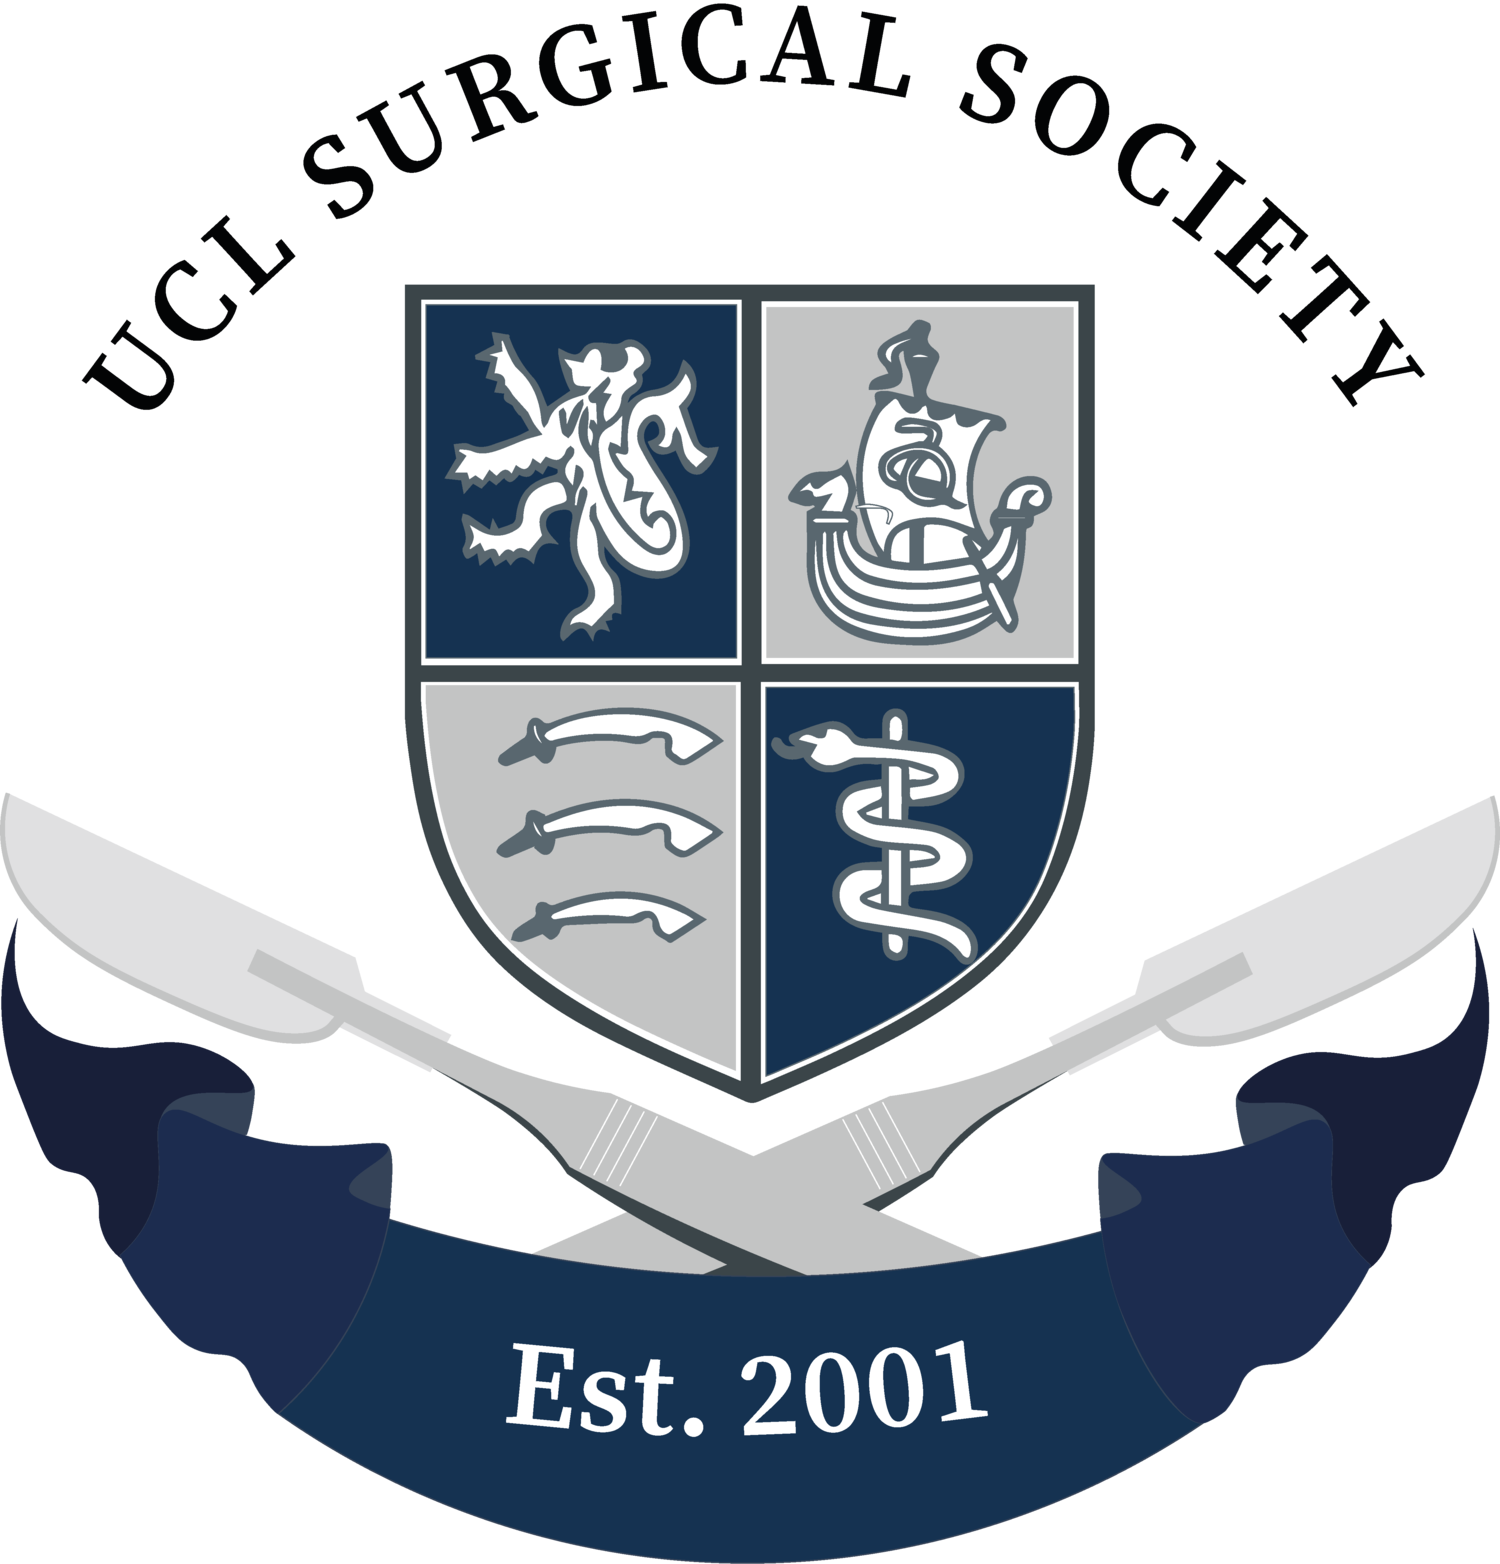 UCL Surgical Society